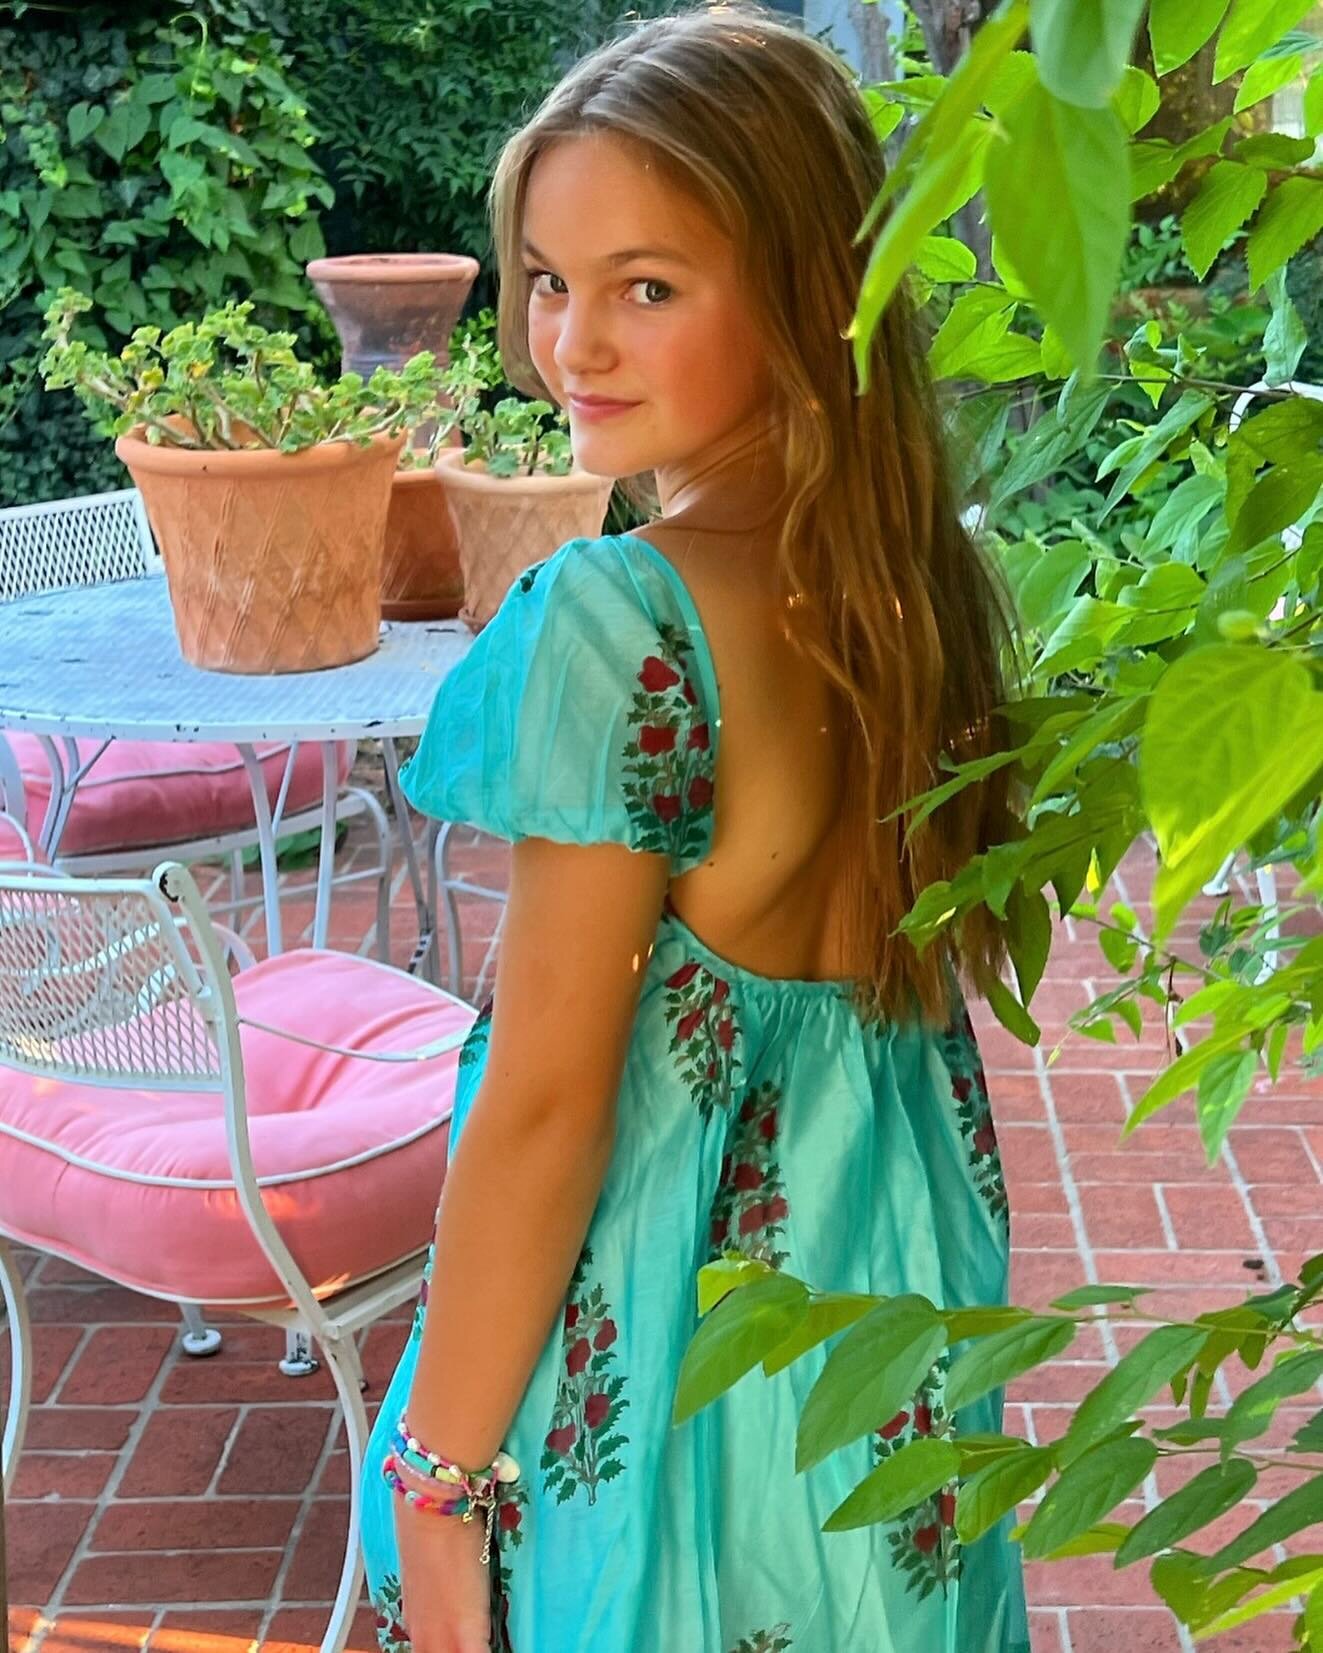 &ldquo;If you look the right way, you can see that the whole world is a garden.&rdquo;🌿🌸🌿🌸🌿🌸
Frances Hodgson Burnett, The Secret Garden
#thesecretgarden #franceshodgsonburnett #garden #gardenparty #partydress #childrensapparel #childrenswear #c